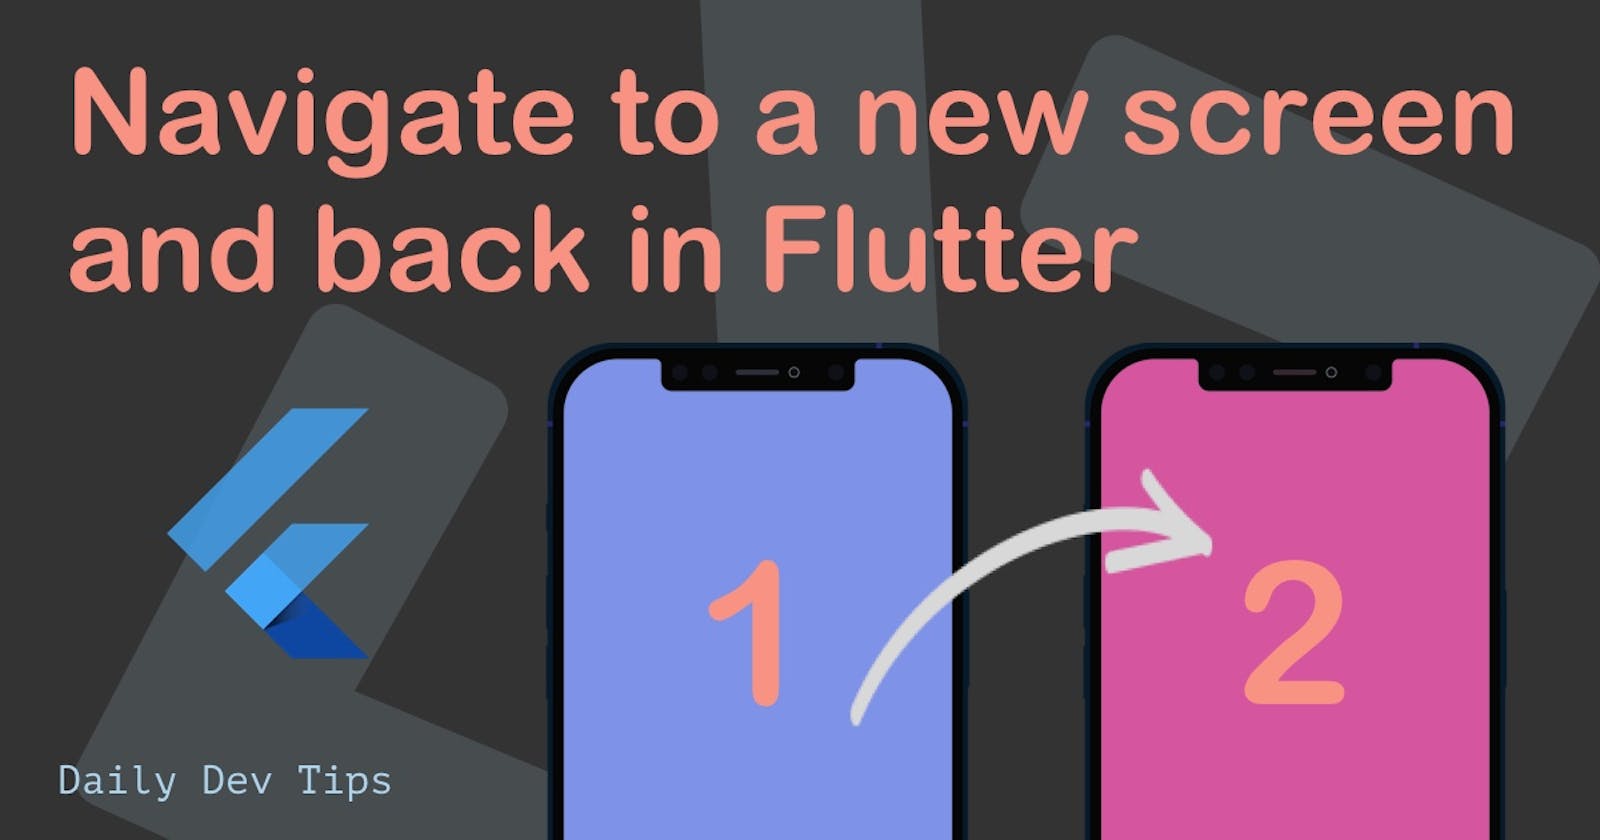 Navigate to a new screen and back in Flutter